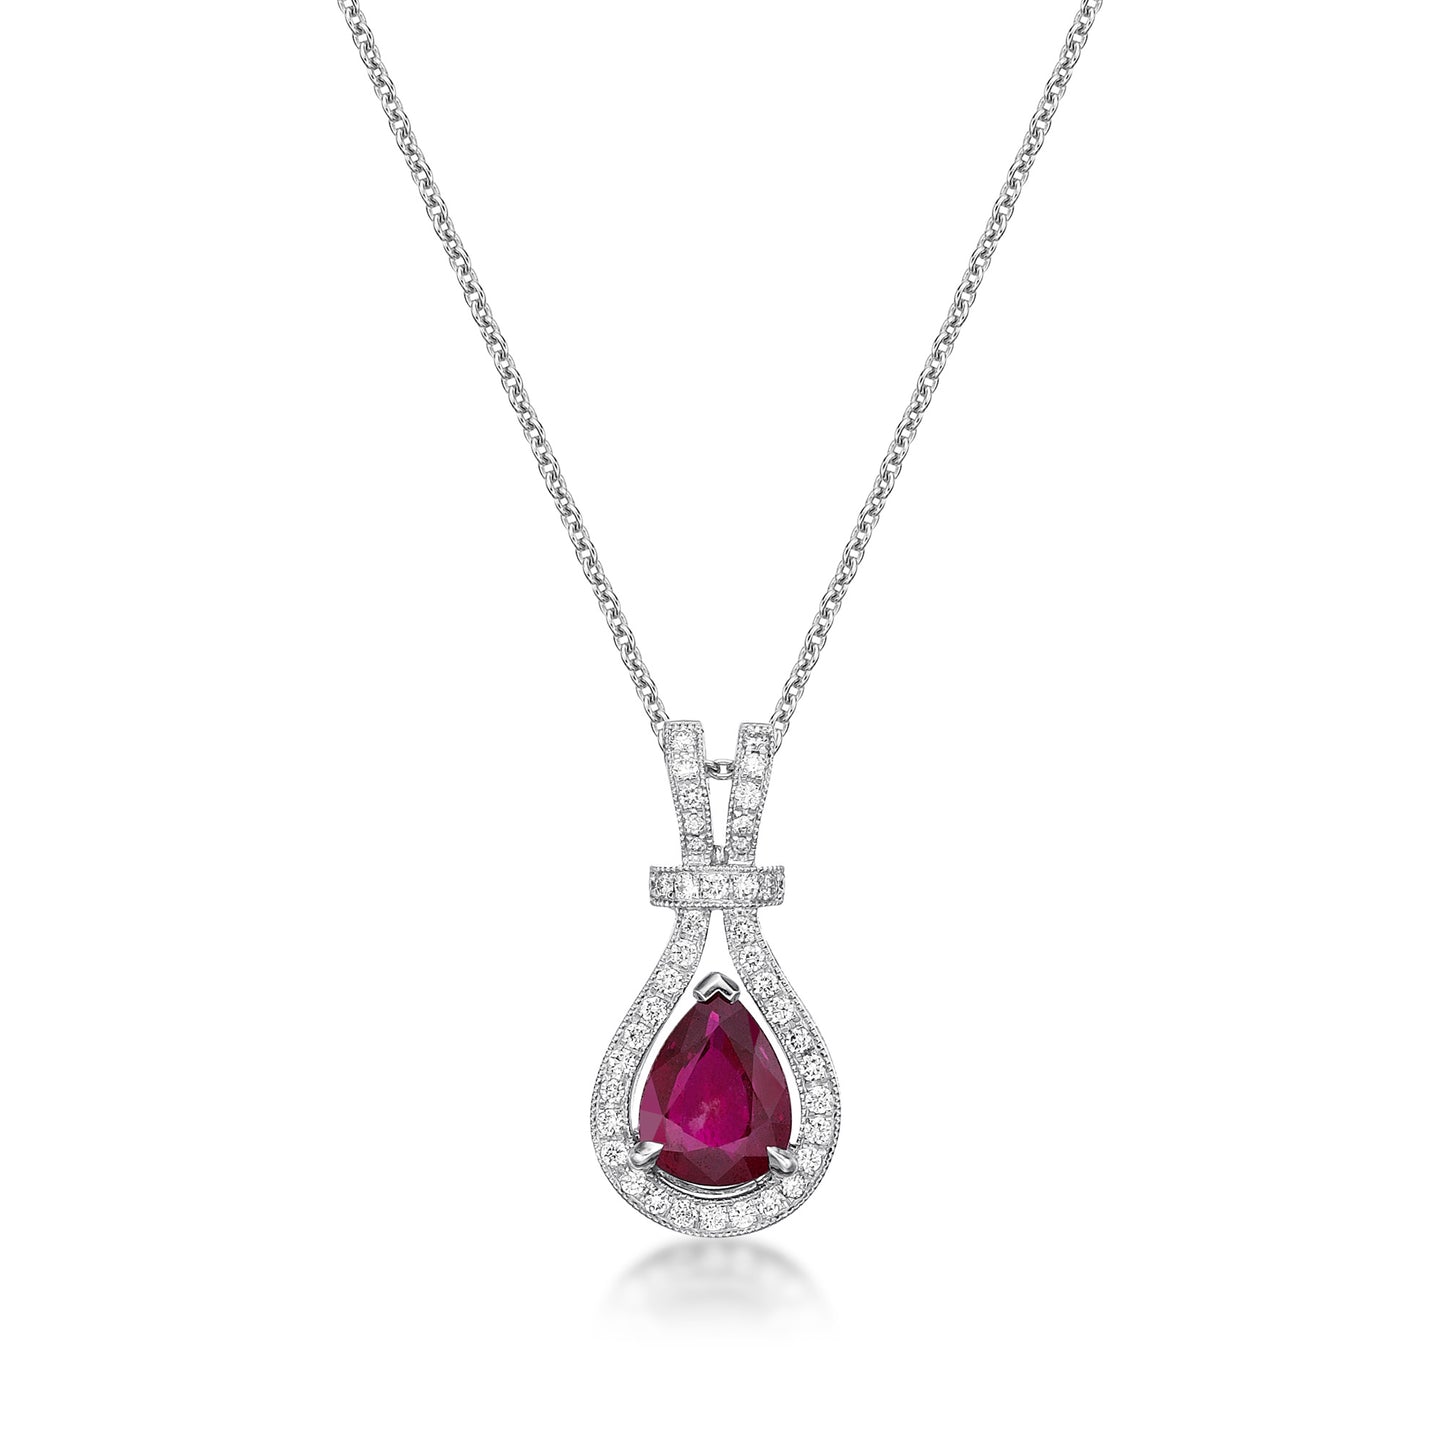 1.66ct Pear-shaped Natural Ruby in a custom 18K White Gold handmade Floating Diamond Halo pendant setting with hand-milgrain detailing